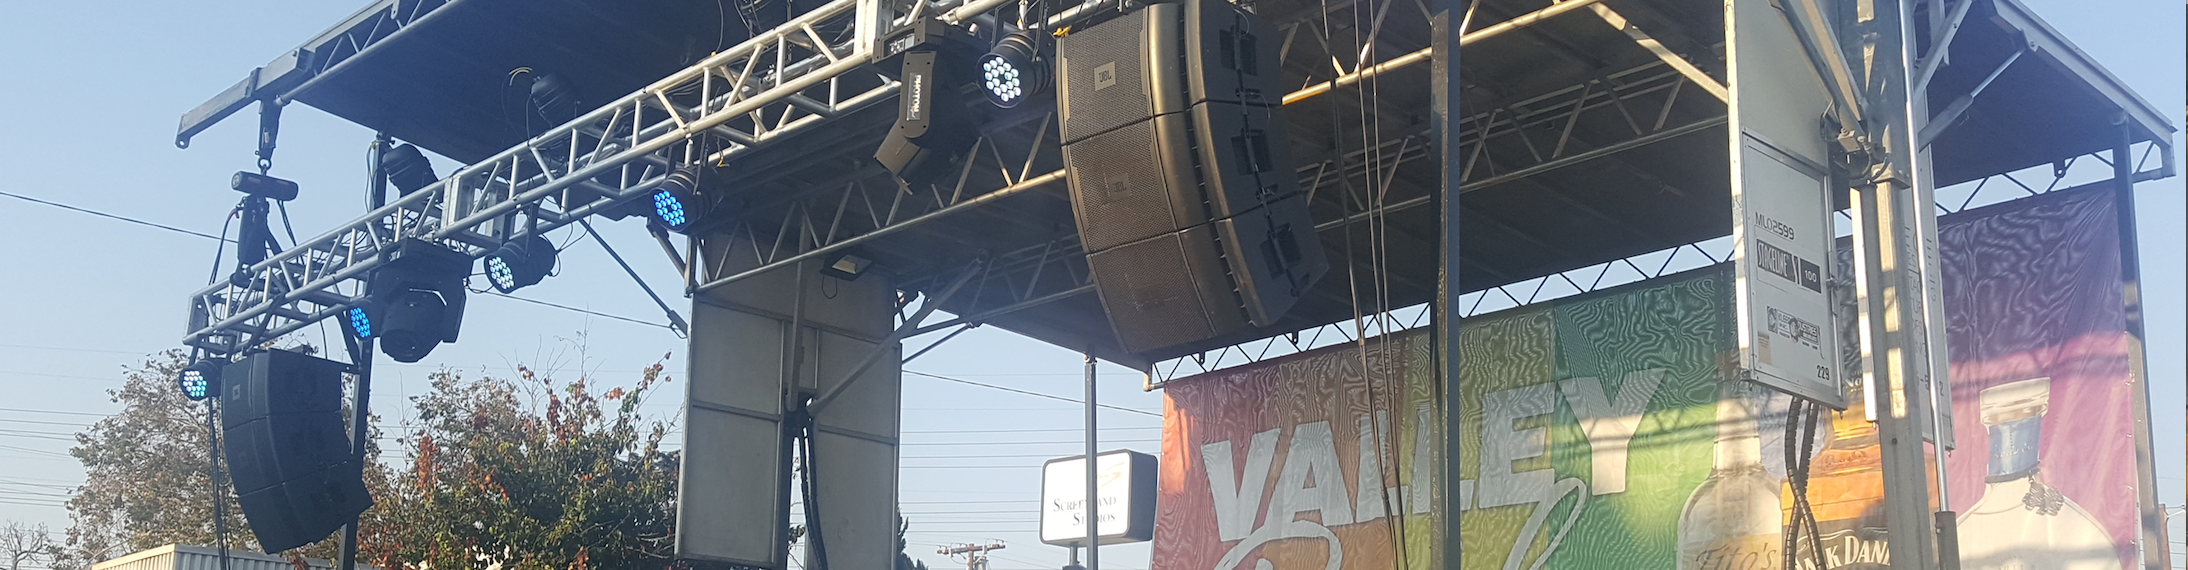 Image of JBL speakers rigged to a stage with truss